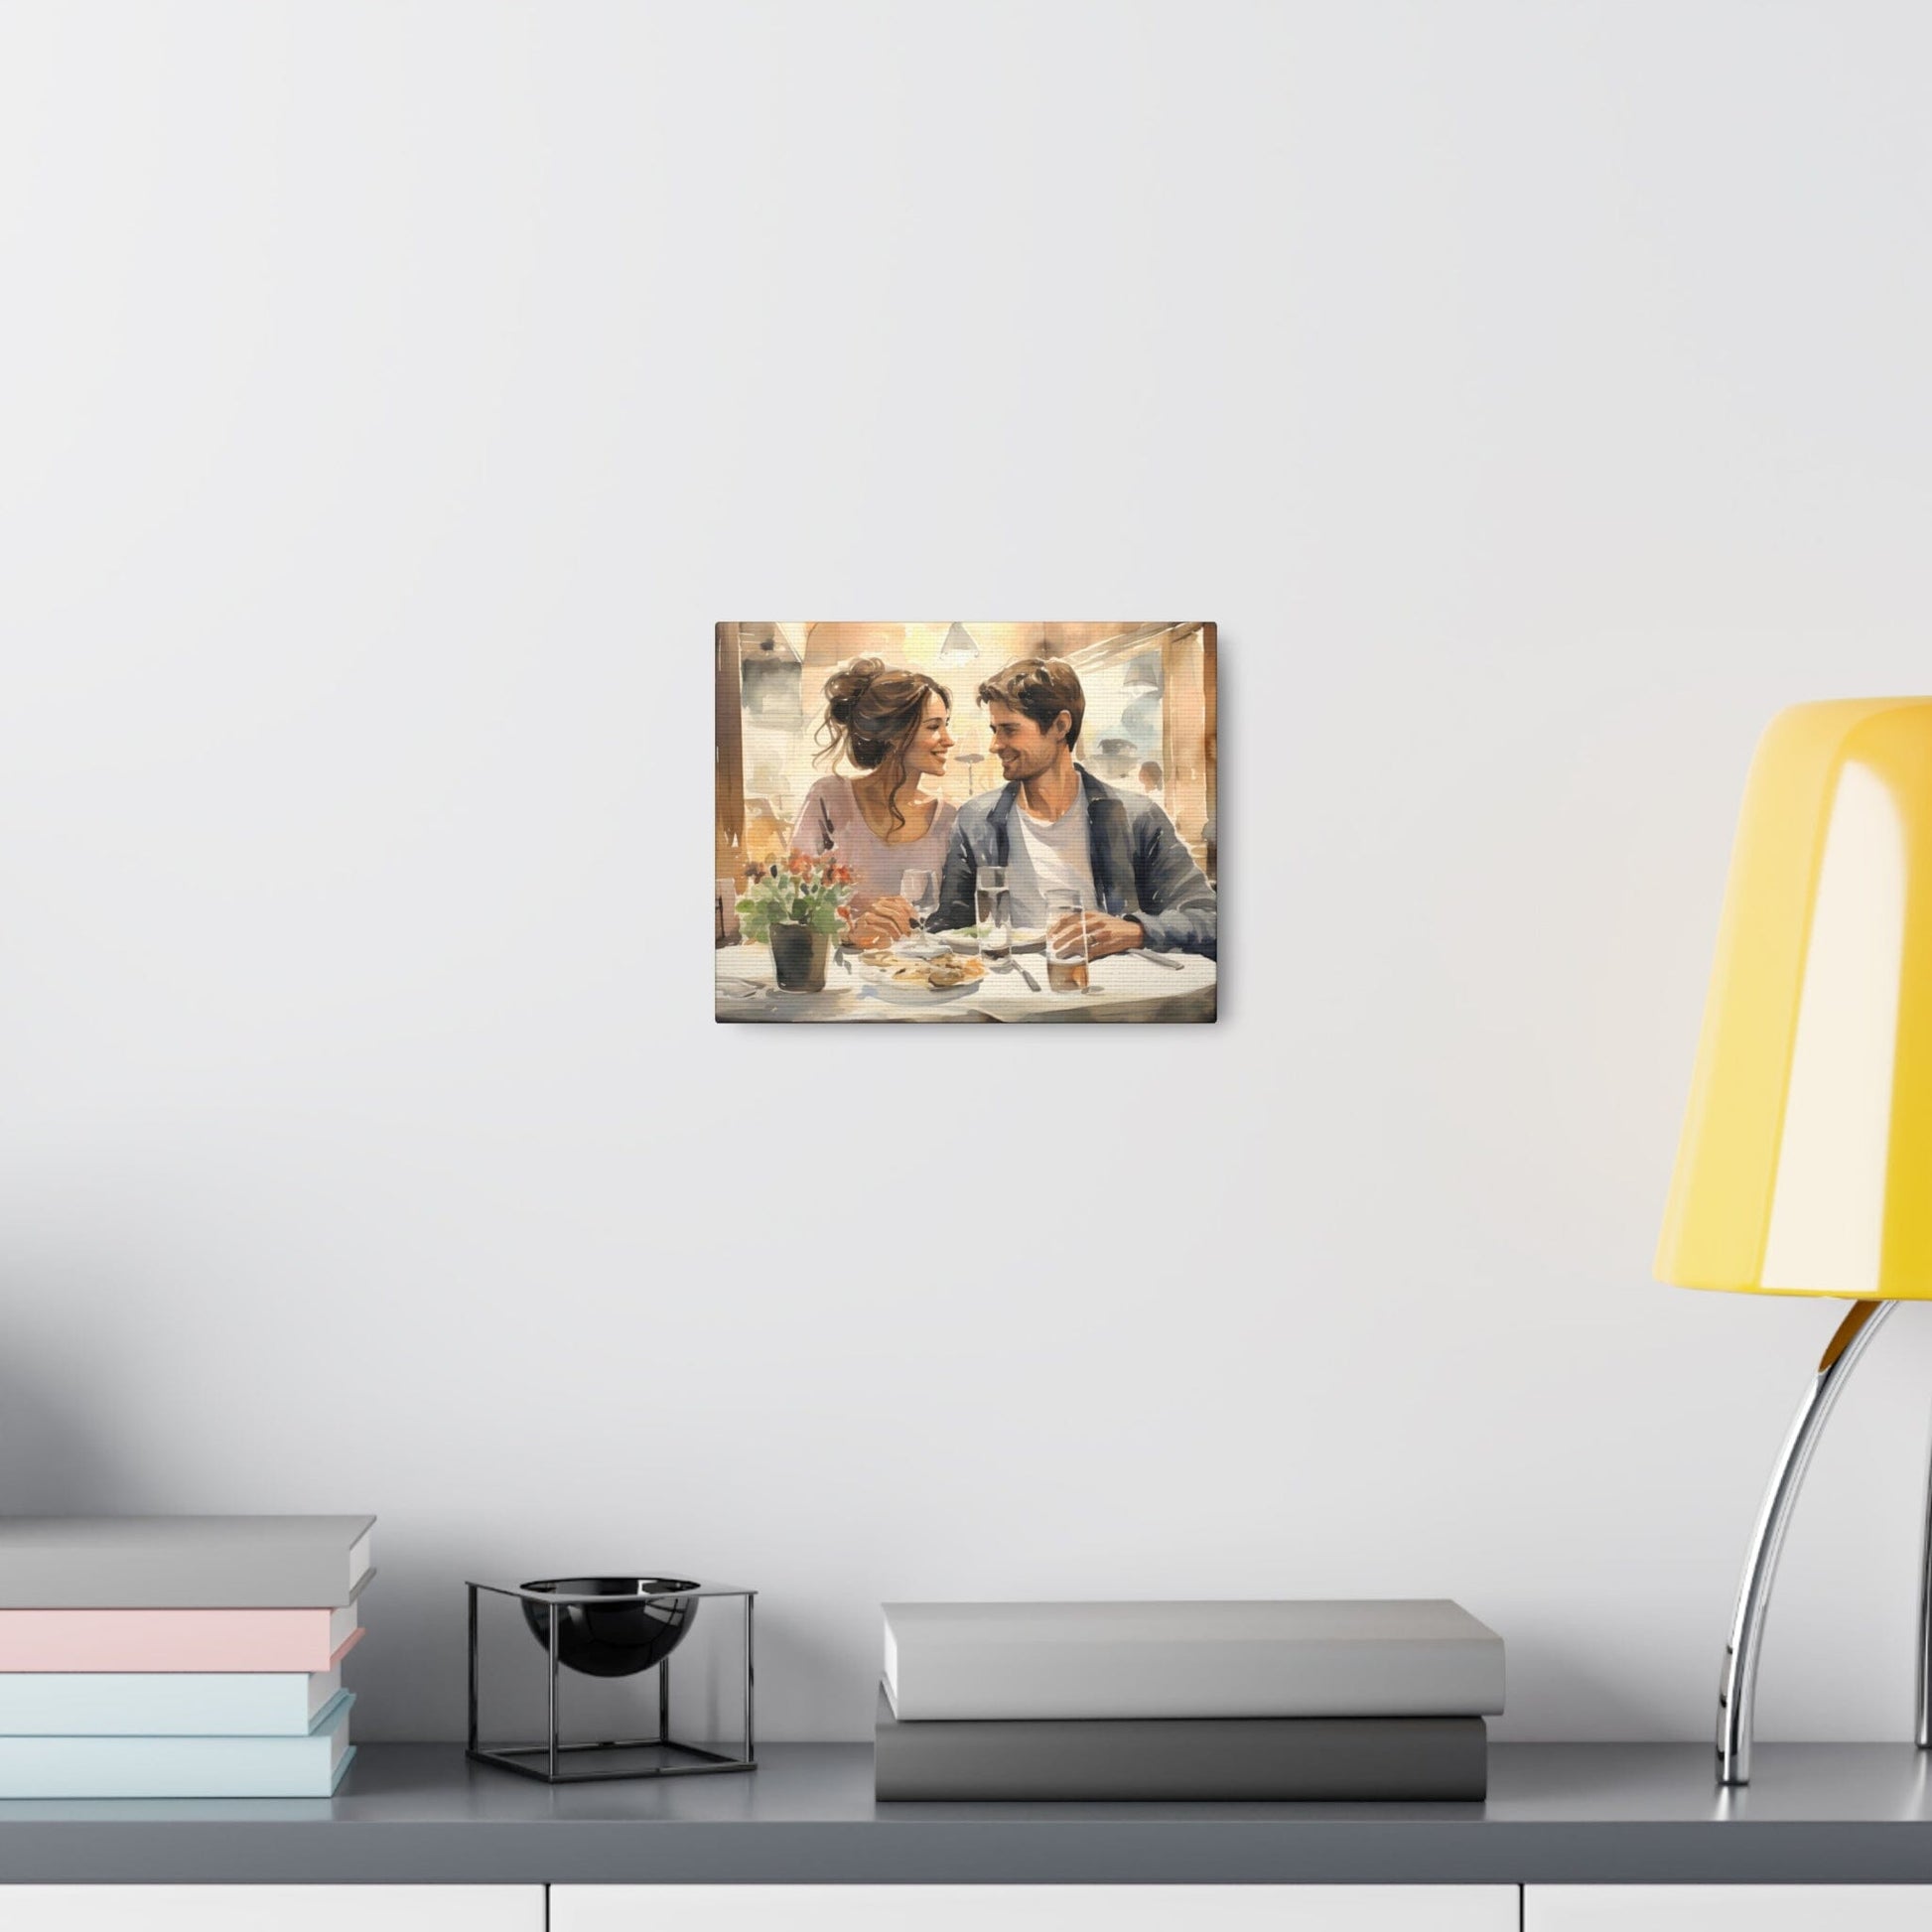 in situ with desk This captivating watercolor canvas showcases a young couple, deeply in love, sharing an intimate meal at a cozy restaurant. The soft, romantic hues highlight their comfort and contentment, creating a tender atmosphere. It's a heartfelt portrayal of romance.